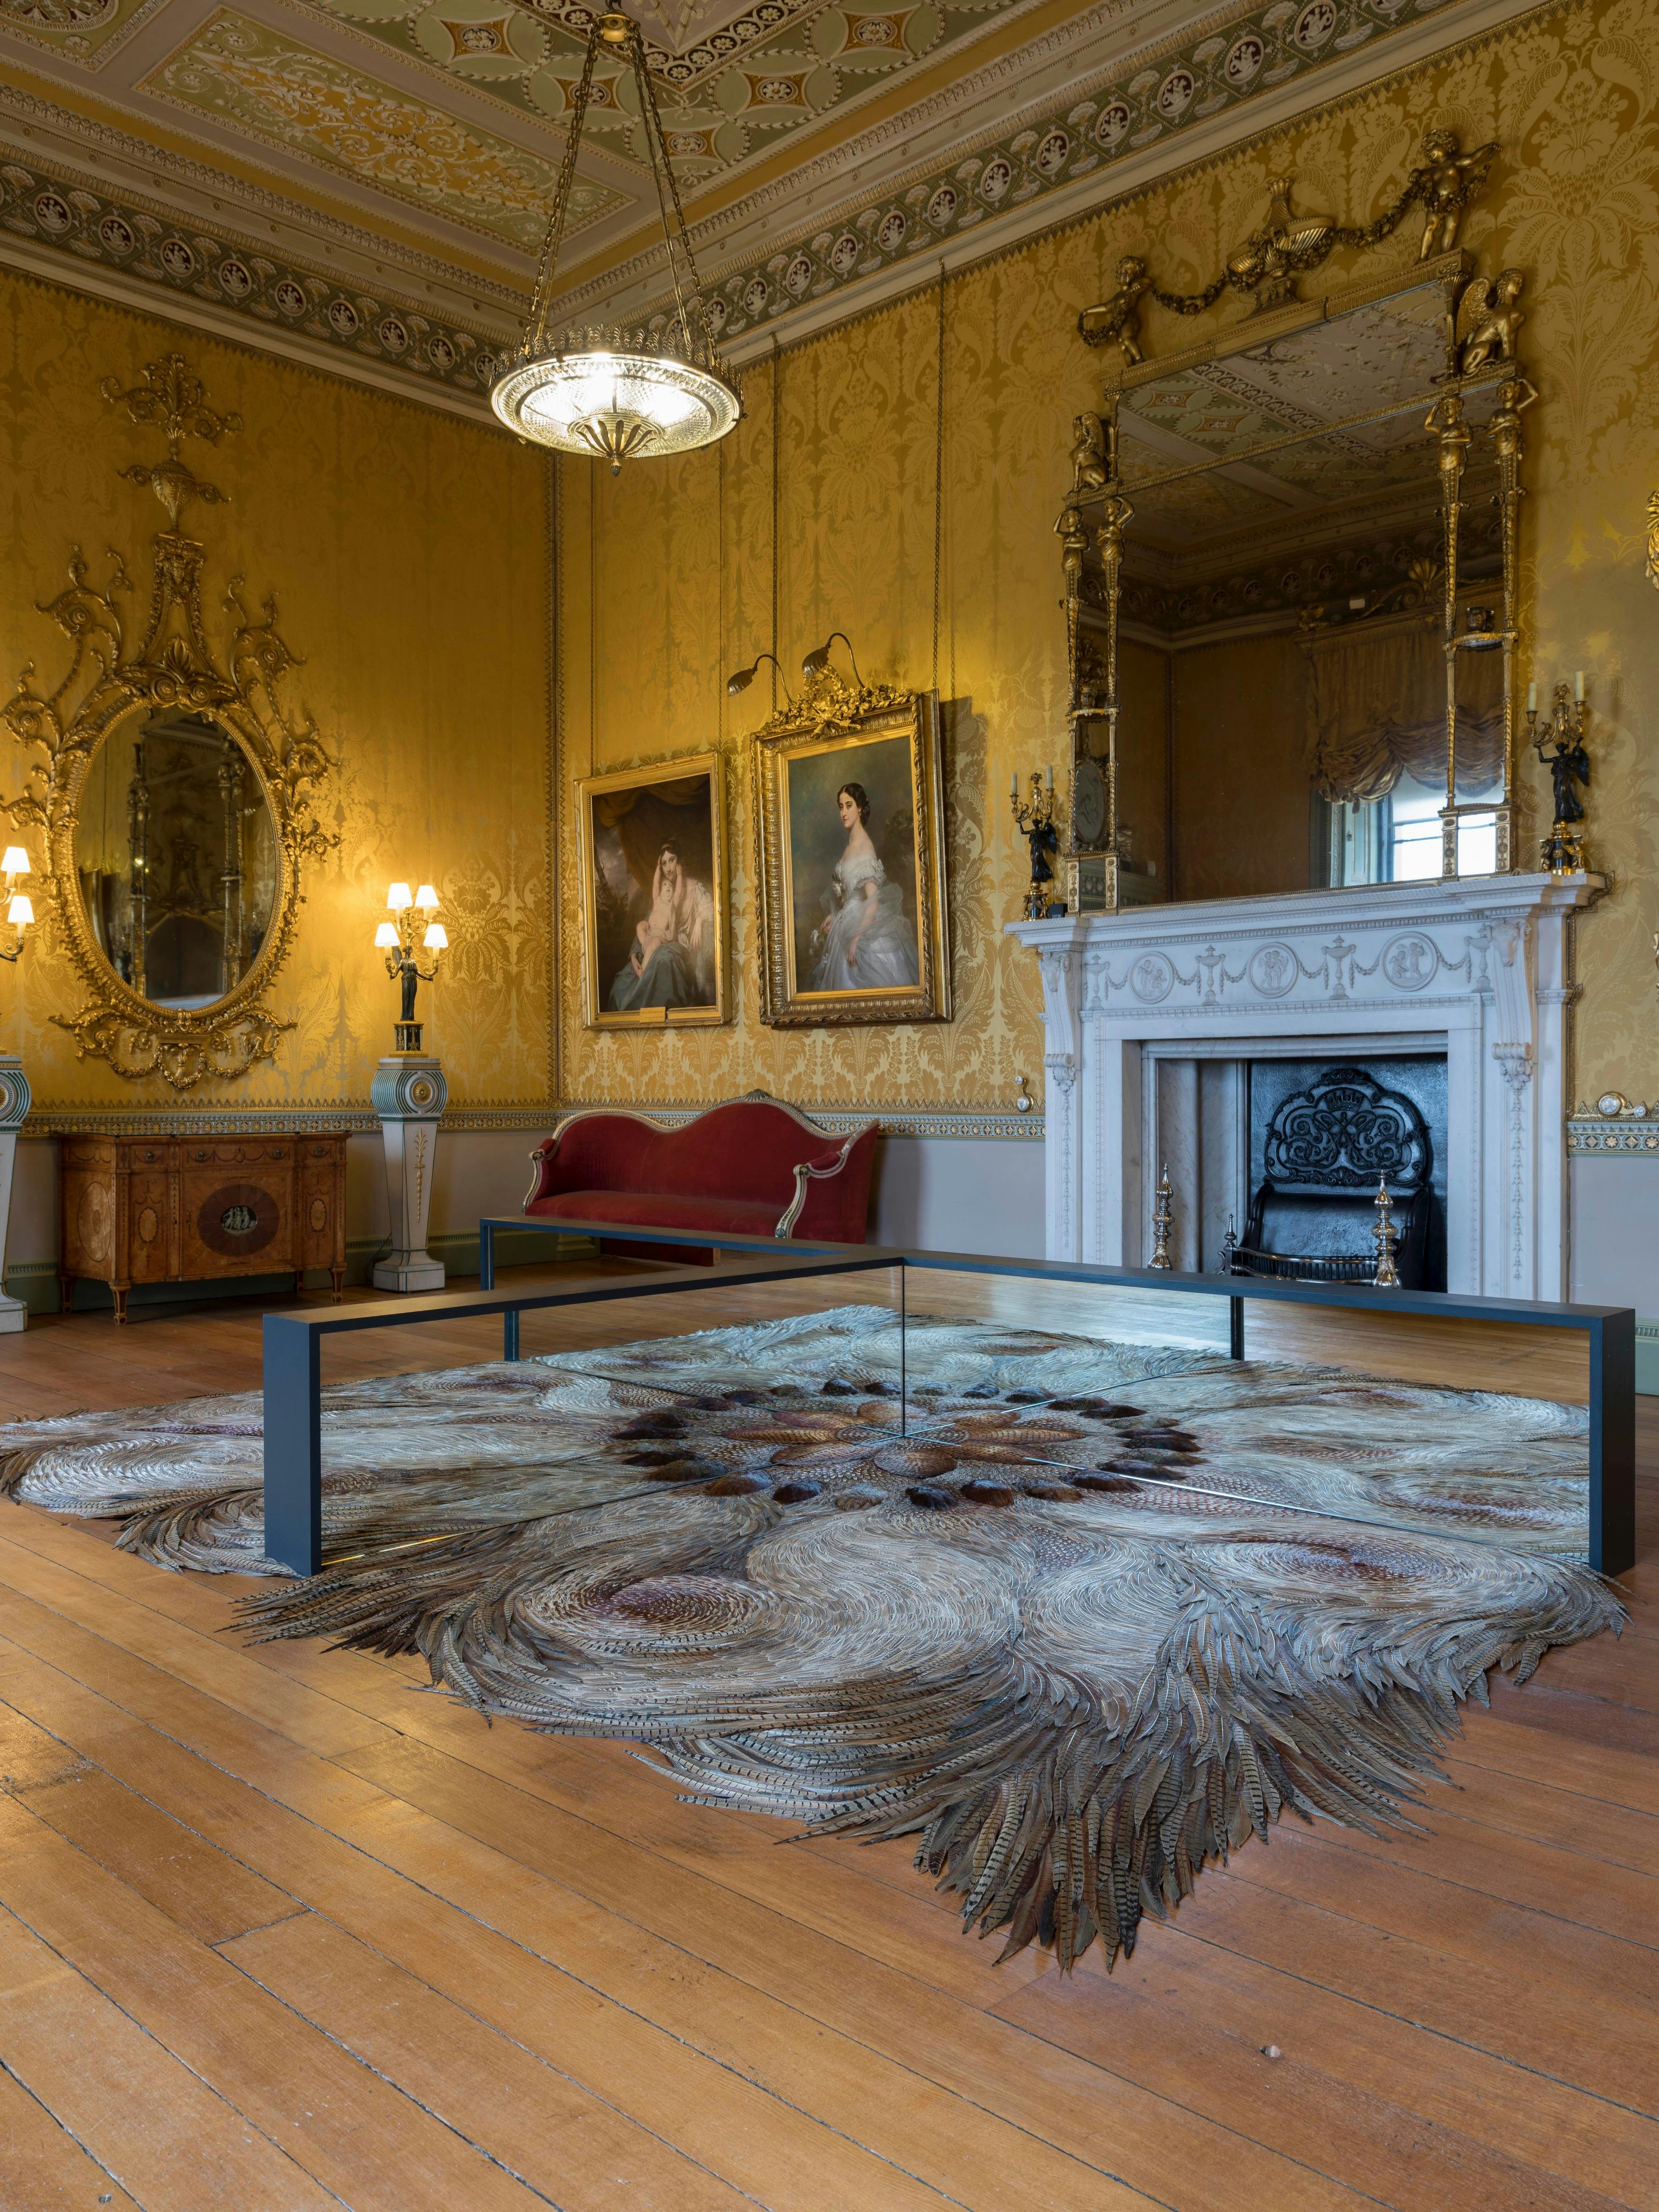 Kate MccGwire, CAVORT (2020)
mixed media installation with pheasant feathers and bespoke mirror mount 52 x 440 x 240 cm
Harewood House installation view